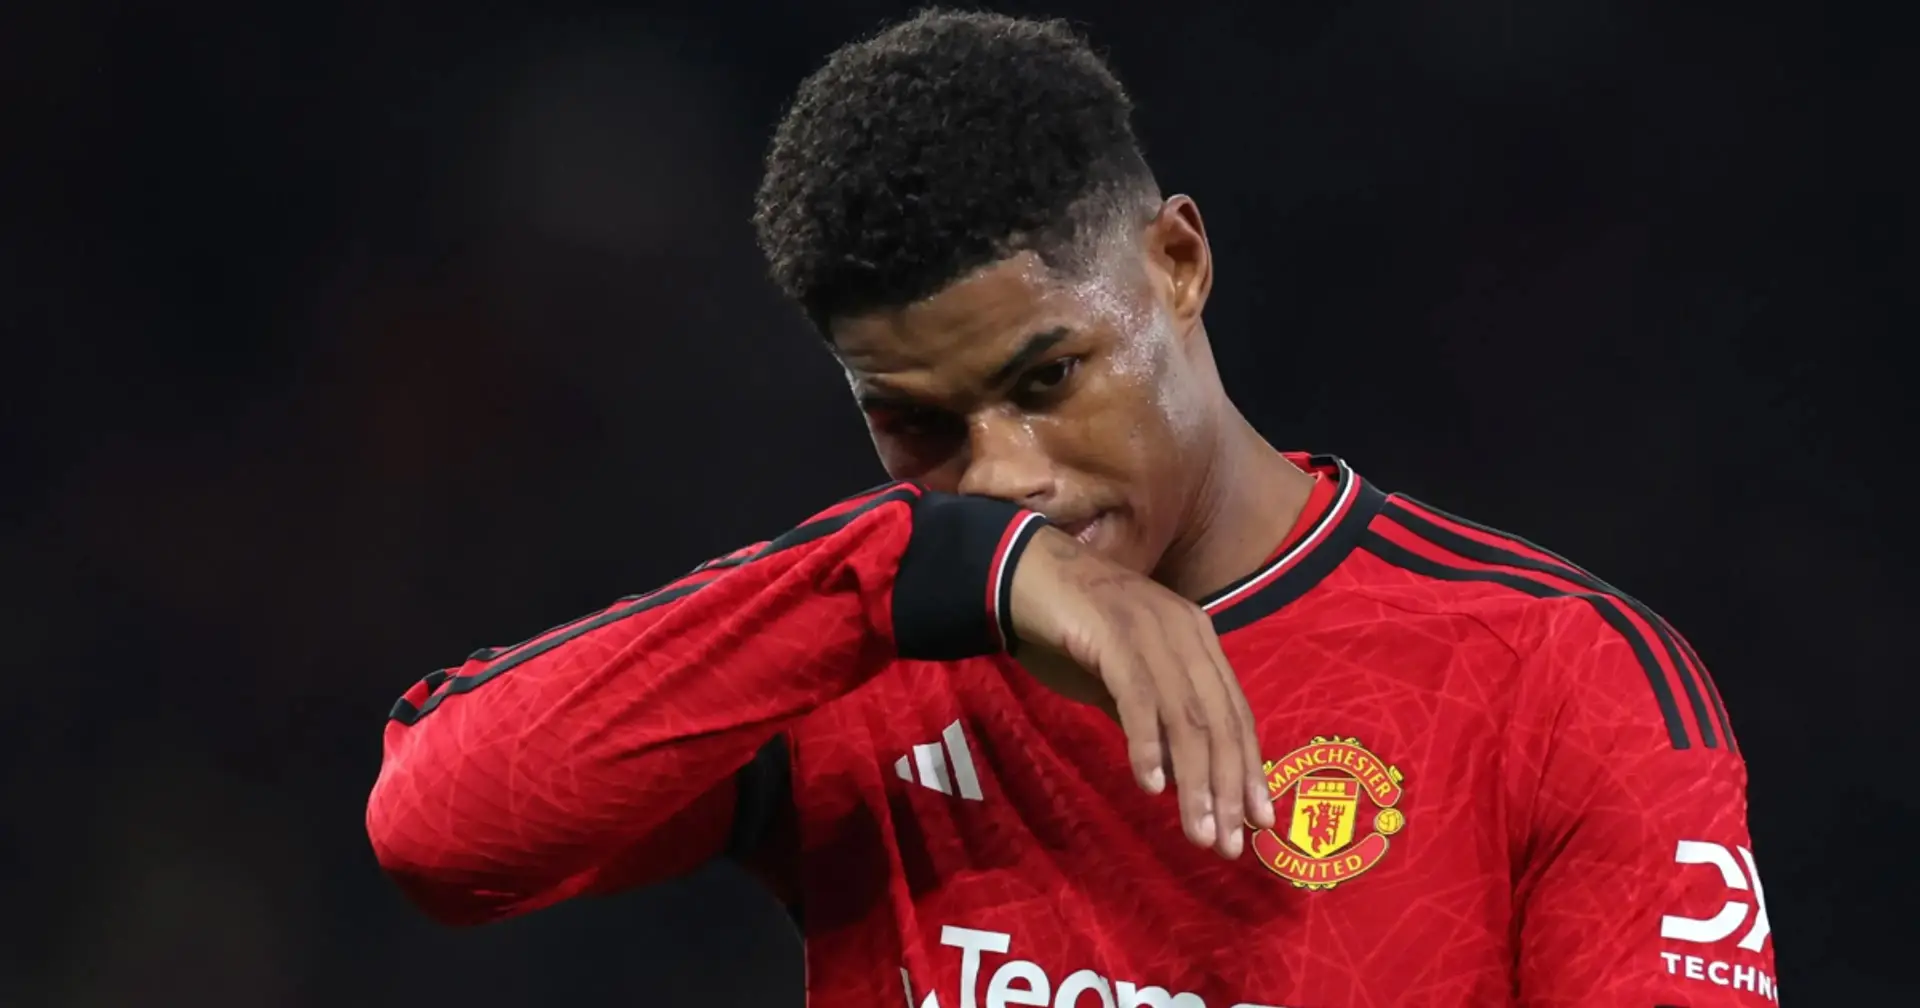 Revealed: exact amount Marcus Rashford was fined for after Belfast incident